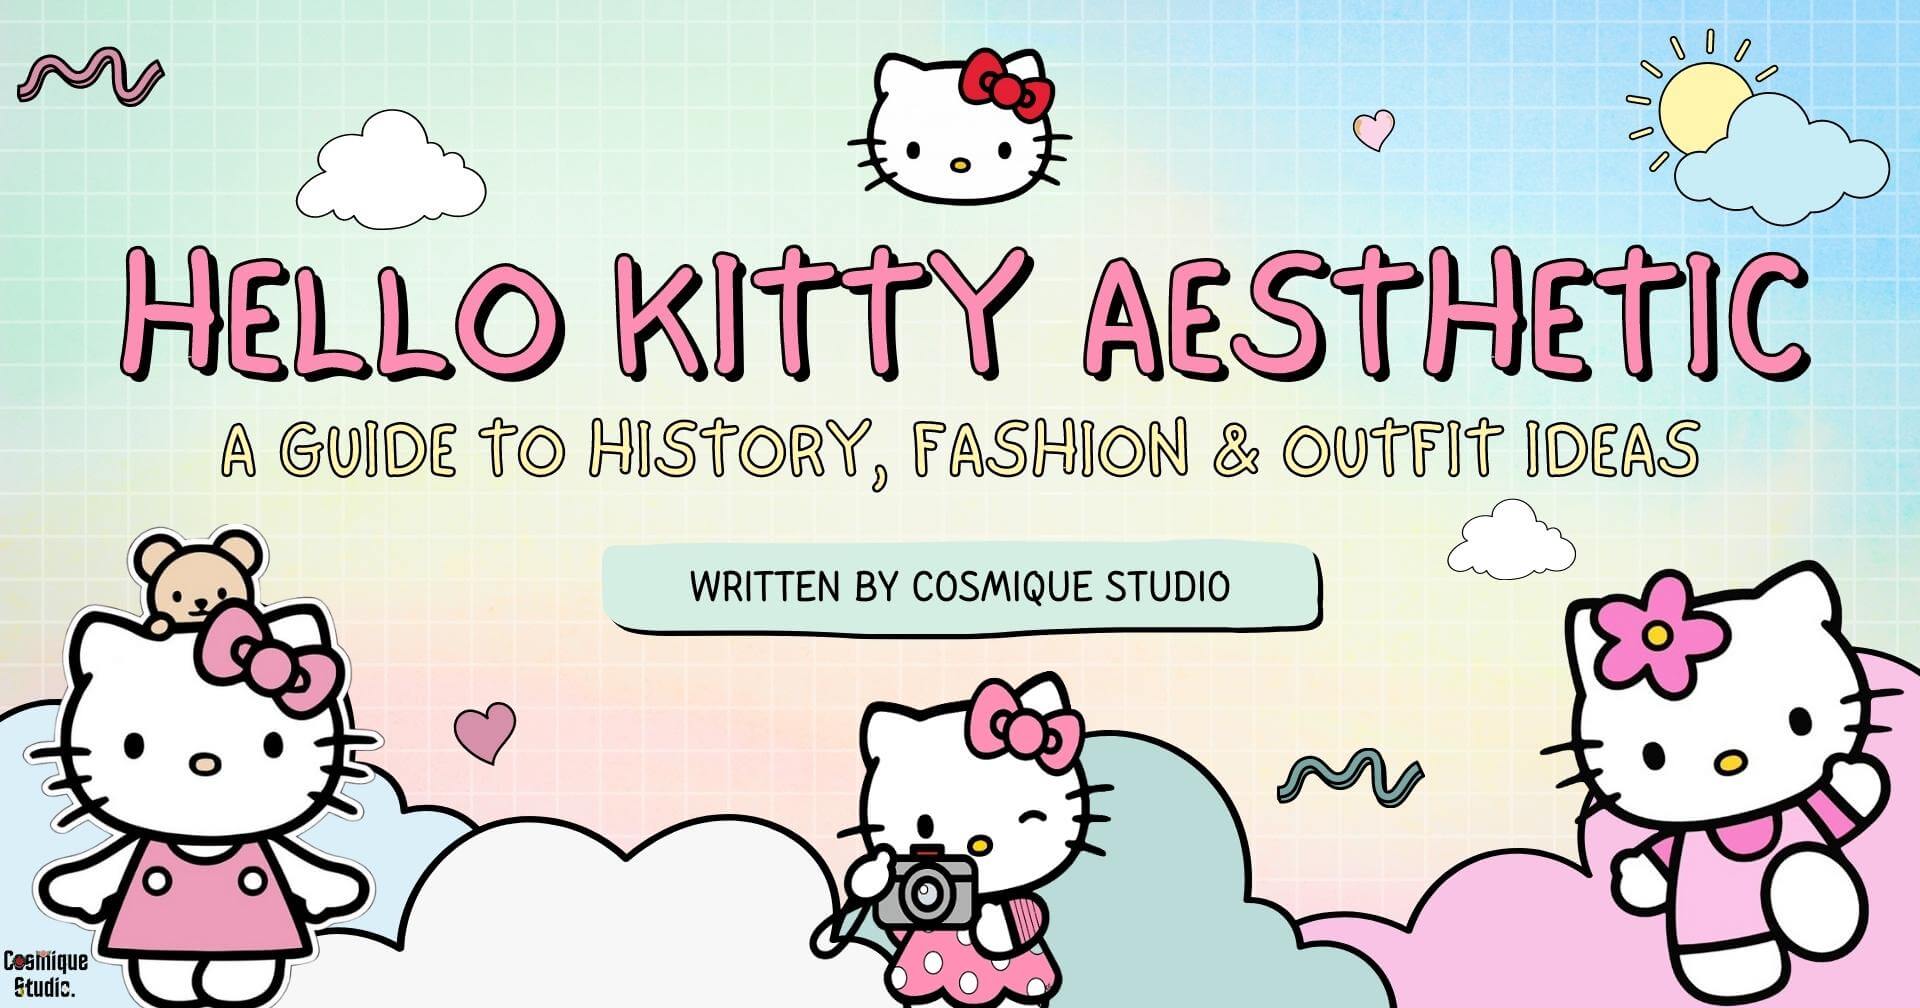 A FASHION GUIDE - Cute Aesthetic Outfit Ideas - Cosmique Studio